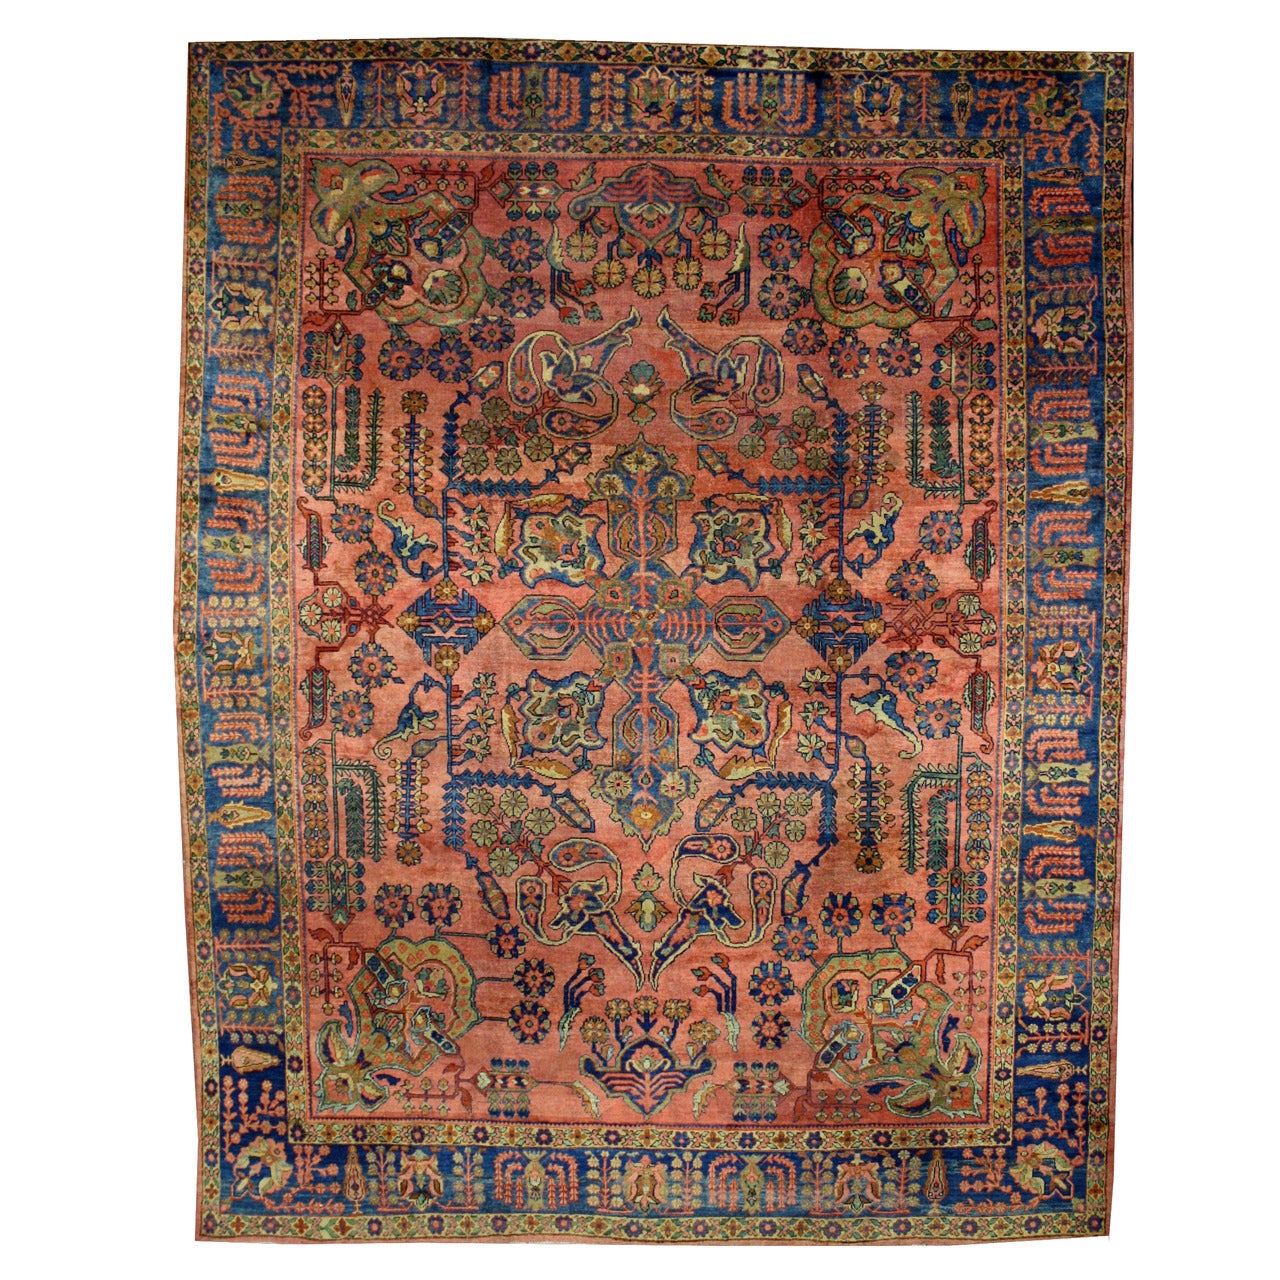 Antique Persian Mahal Area Rug with Cypress and Weeping Willow Trees